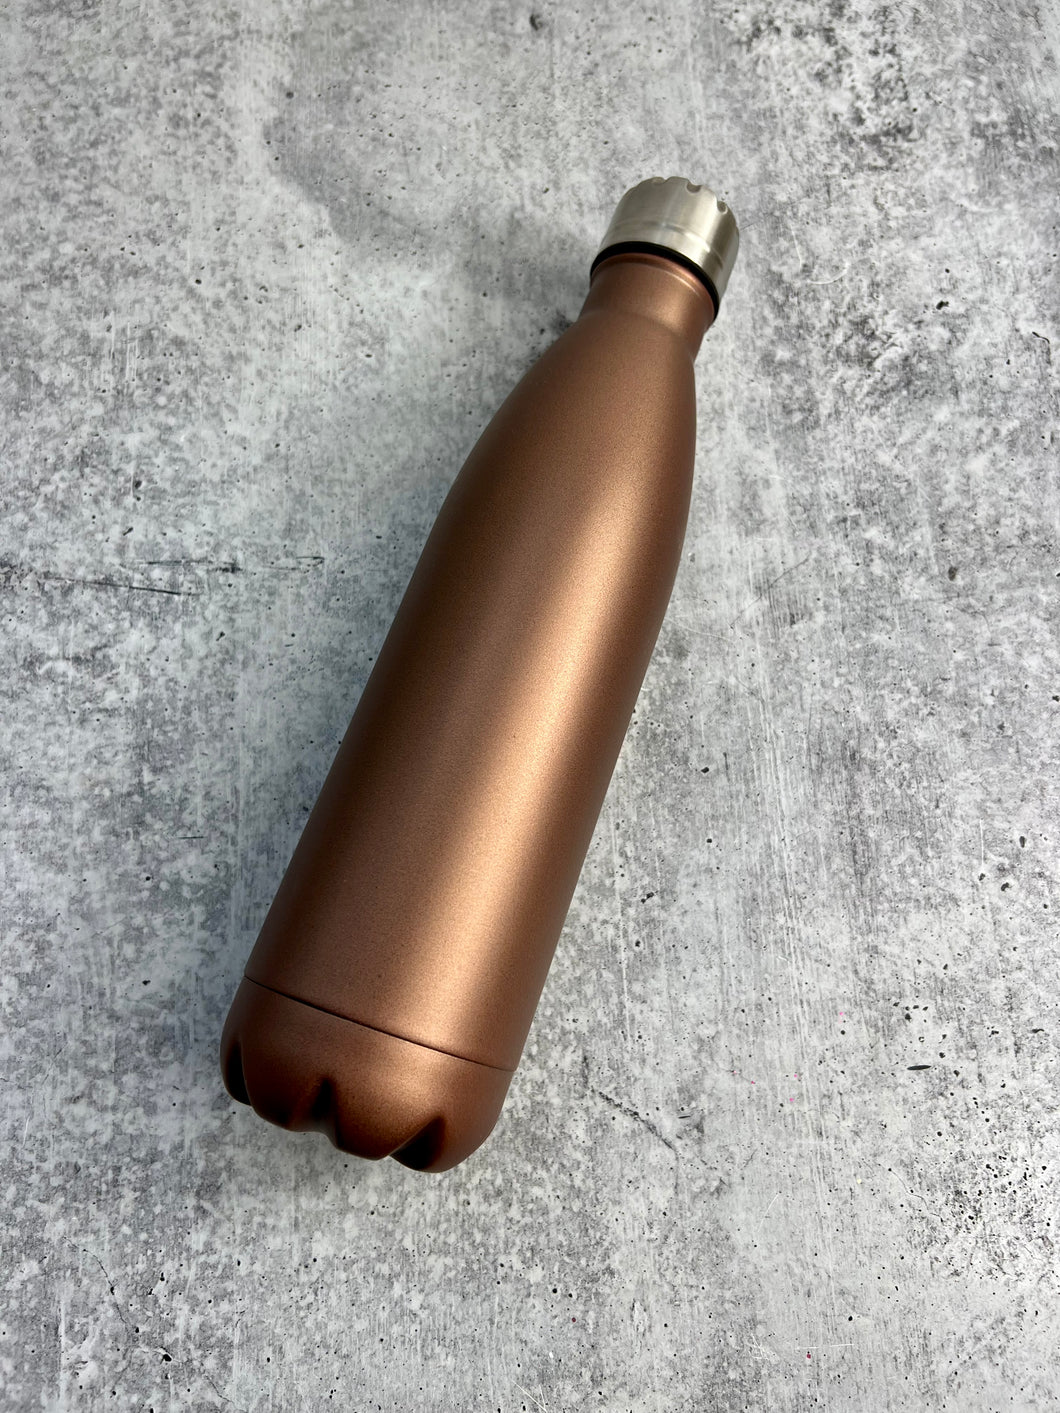 CLEARANCE - Copper Powder Coated Stainless Steel water bottle, 17 oz